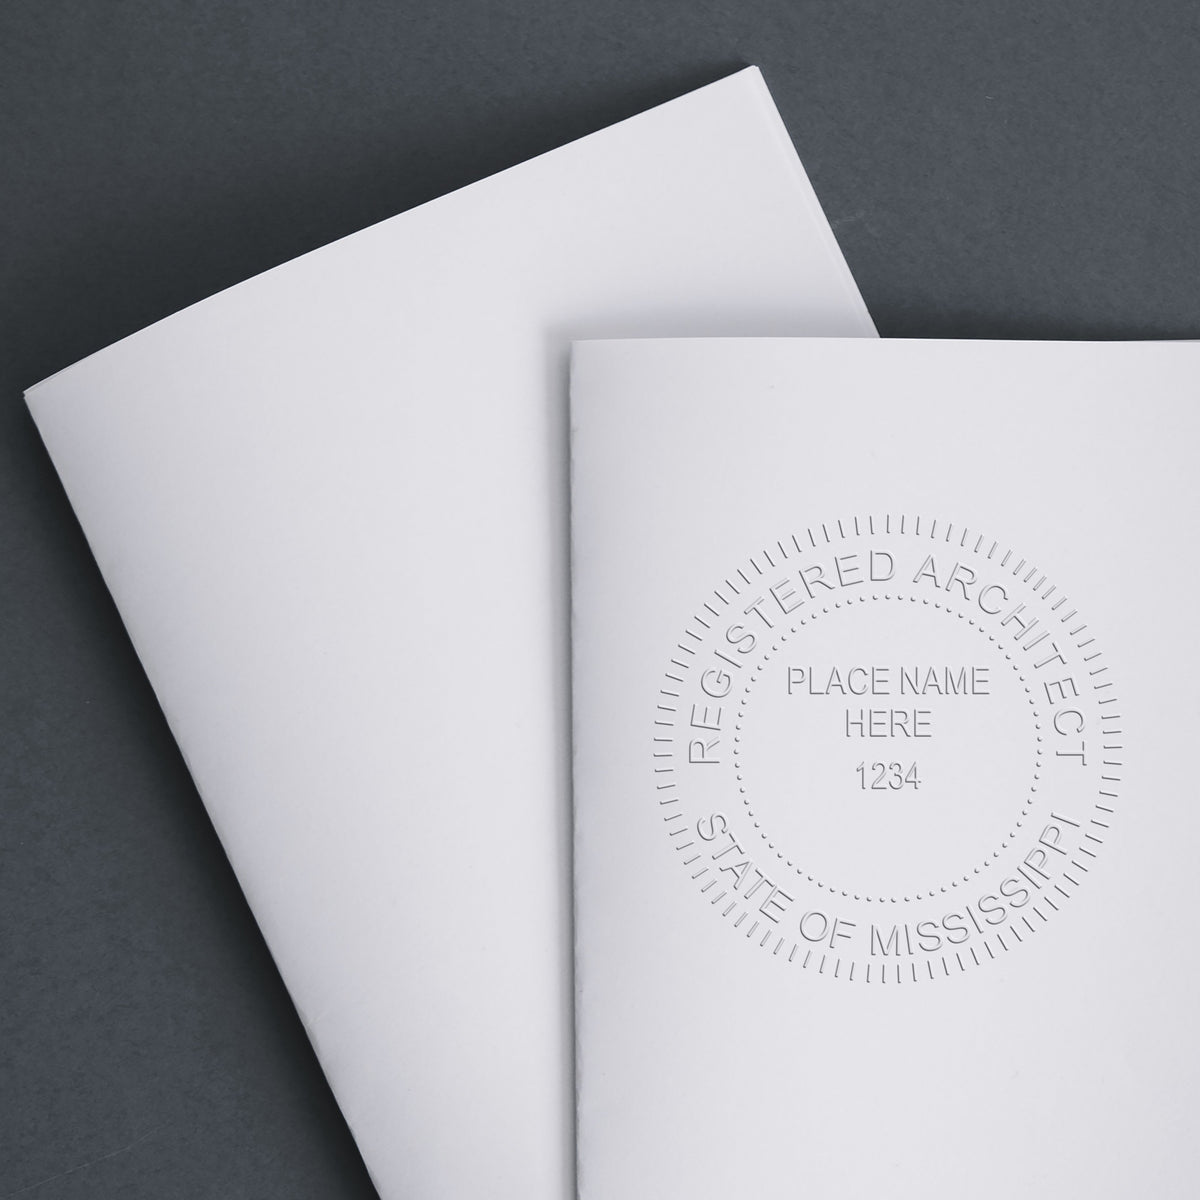 An in use photo of the Gift Mississippi Architect Seal showing a sample imprint on a cardstock